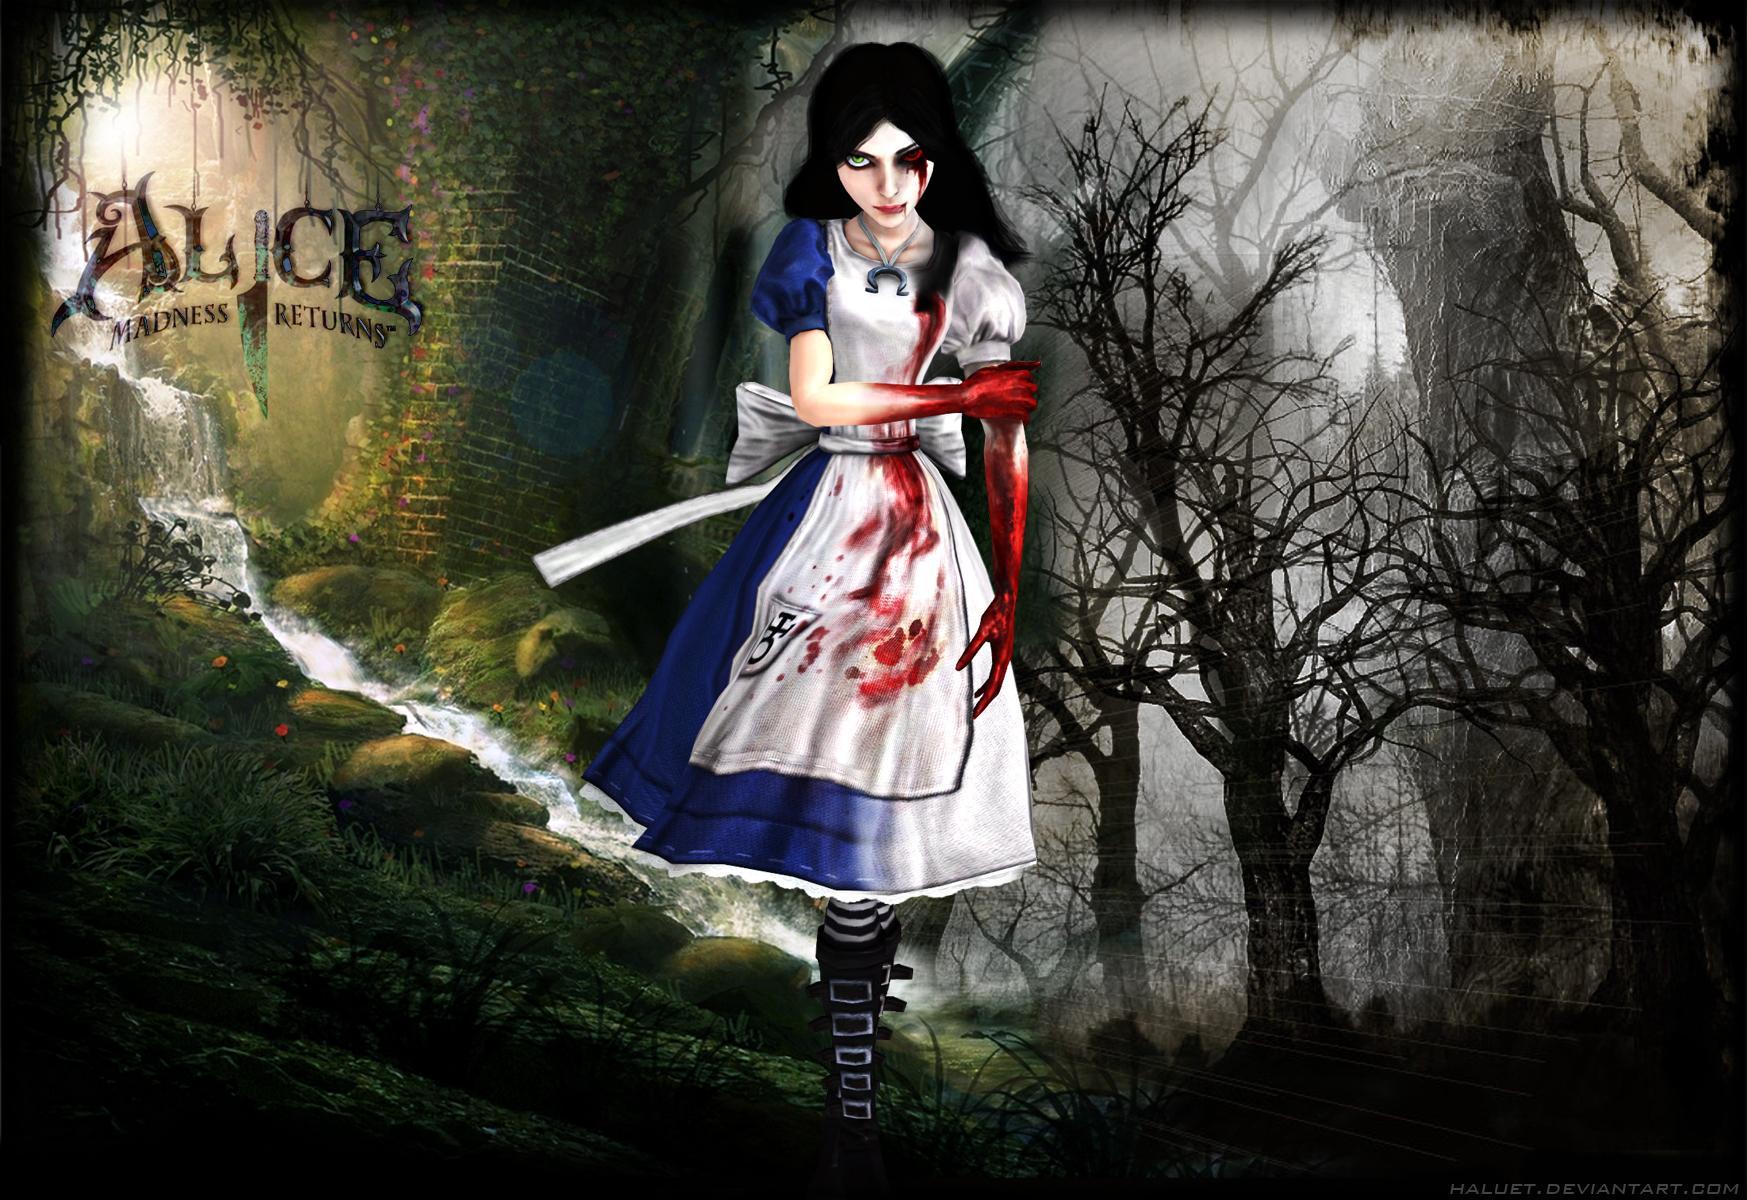 alice madness returns complete collection pc